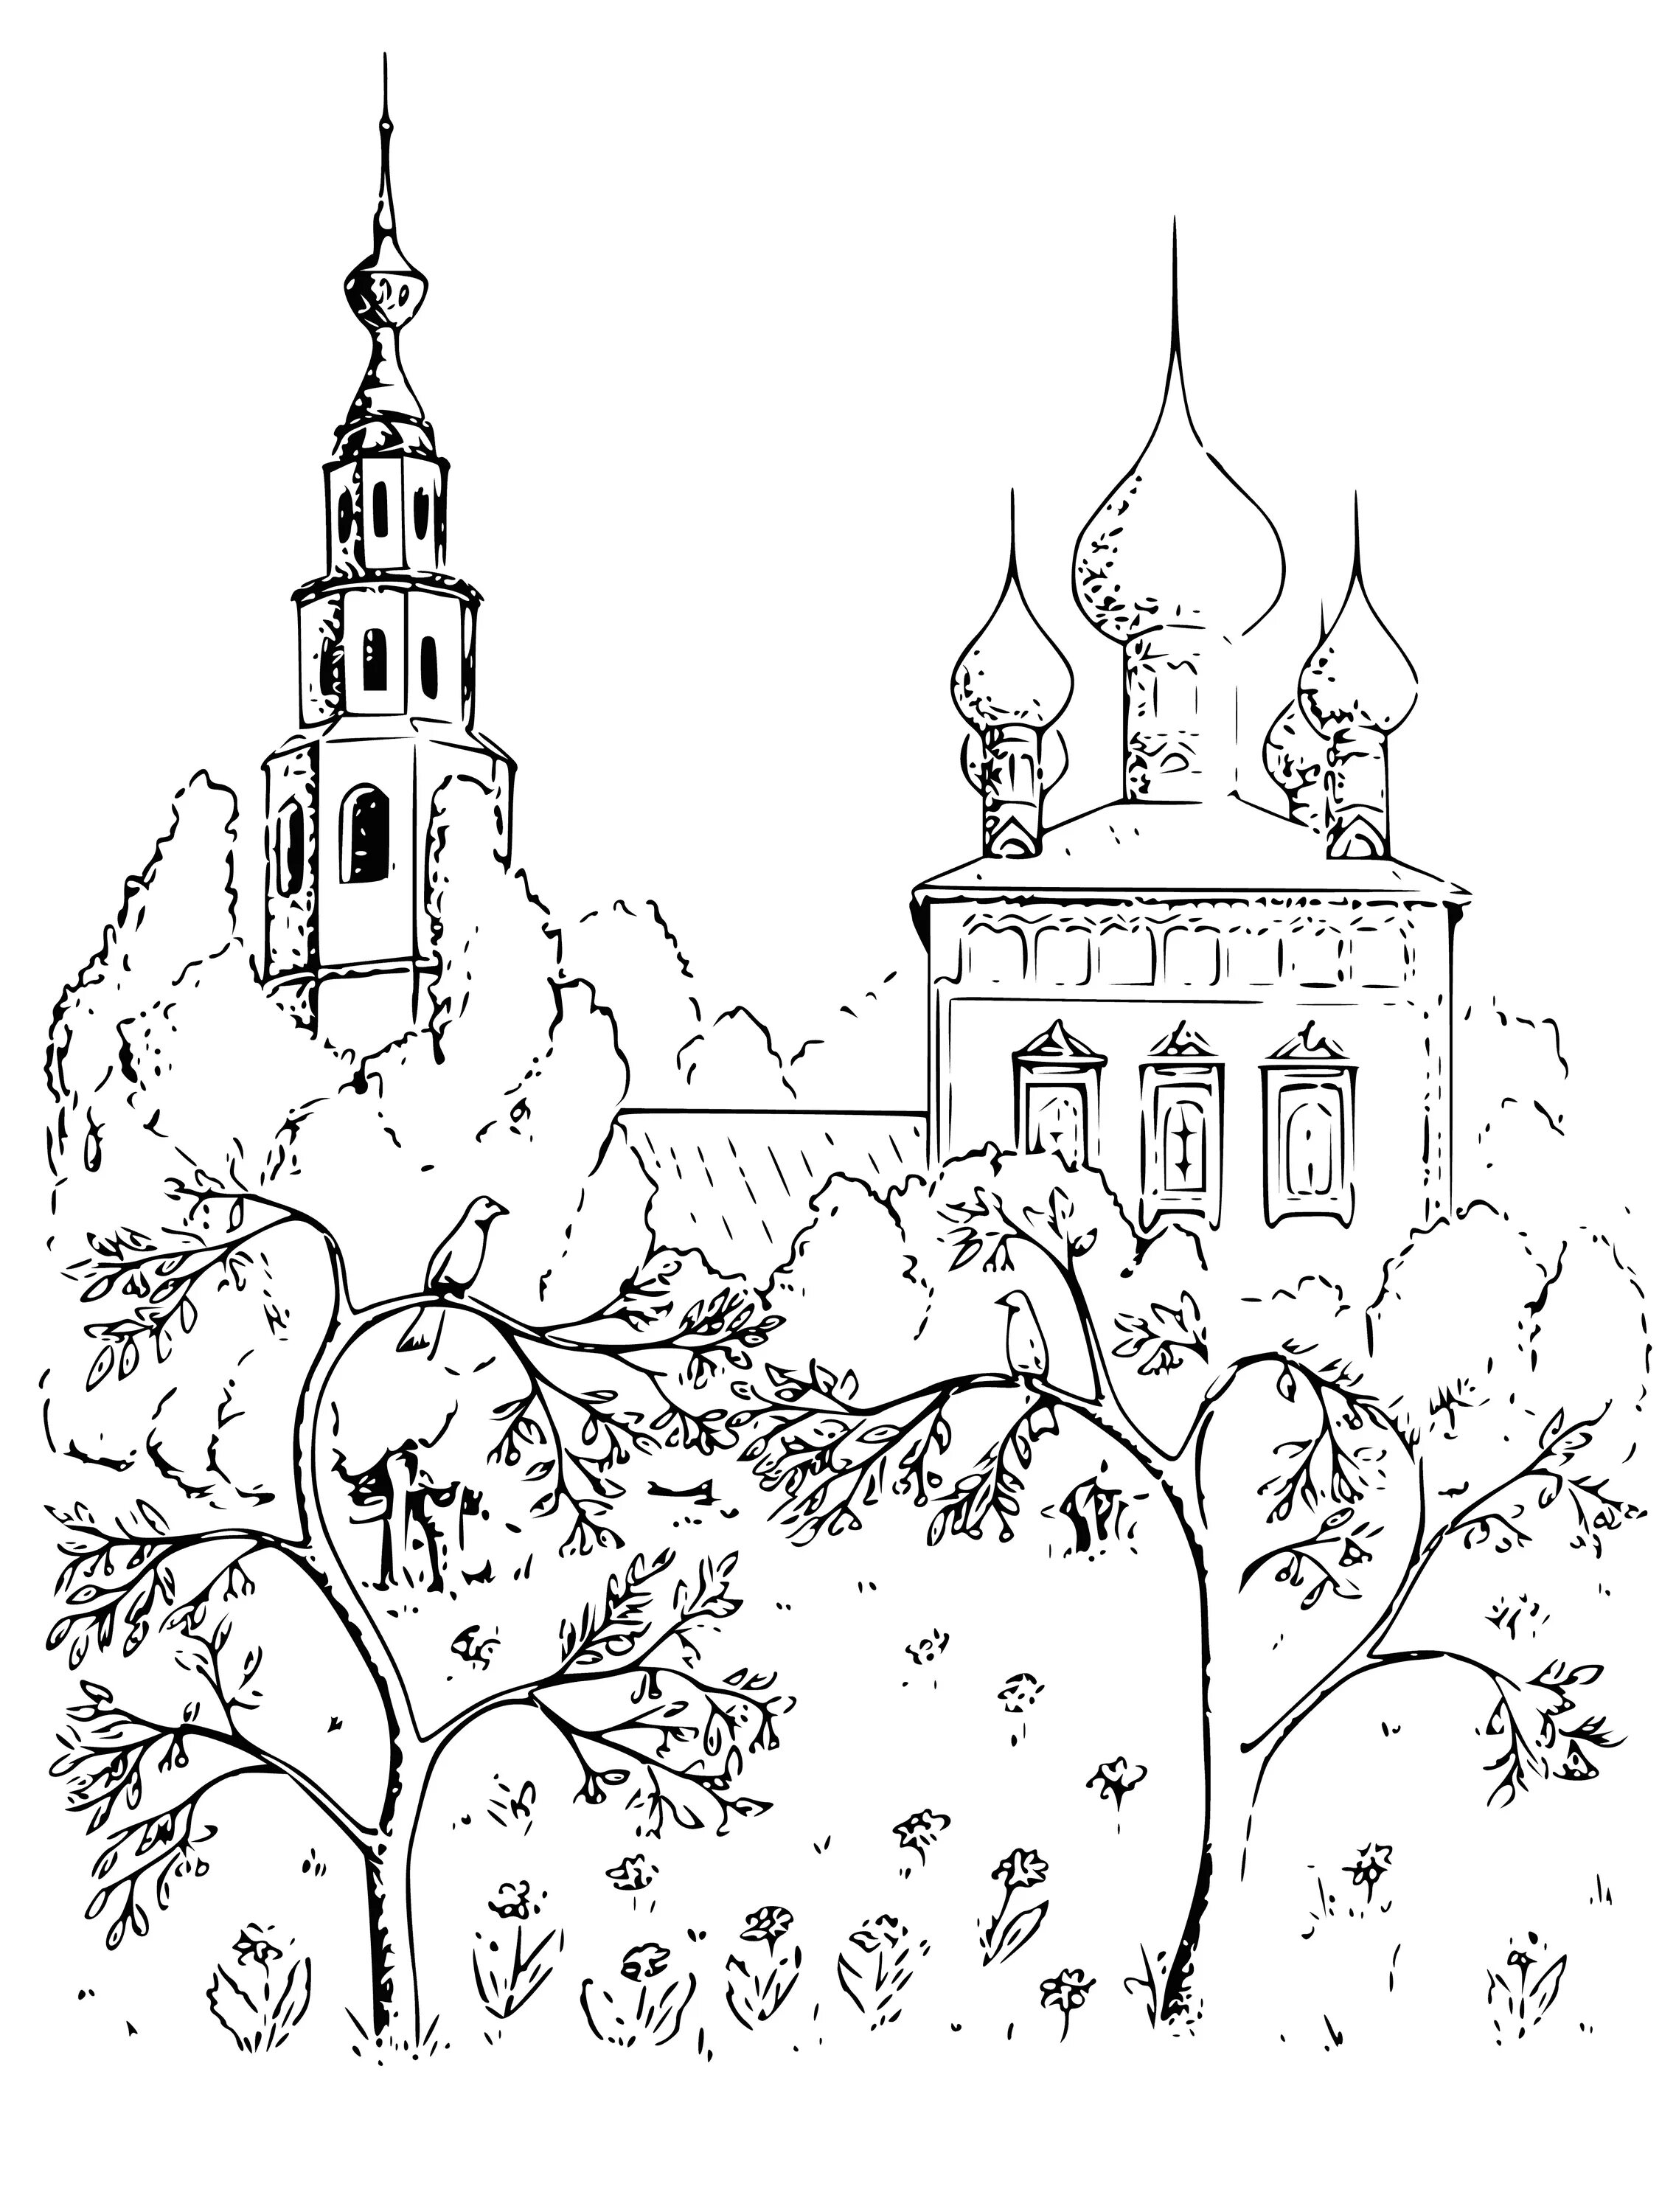 Exquisite orthodox coloring book for kids